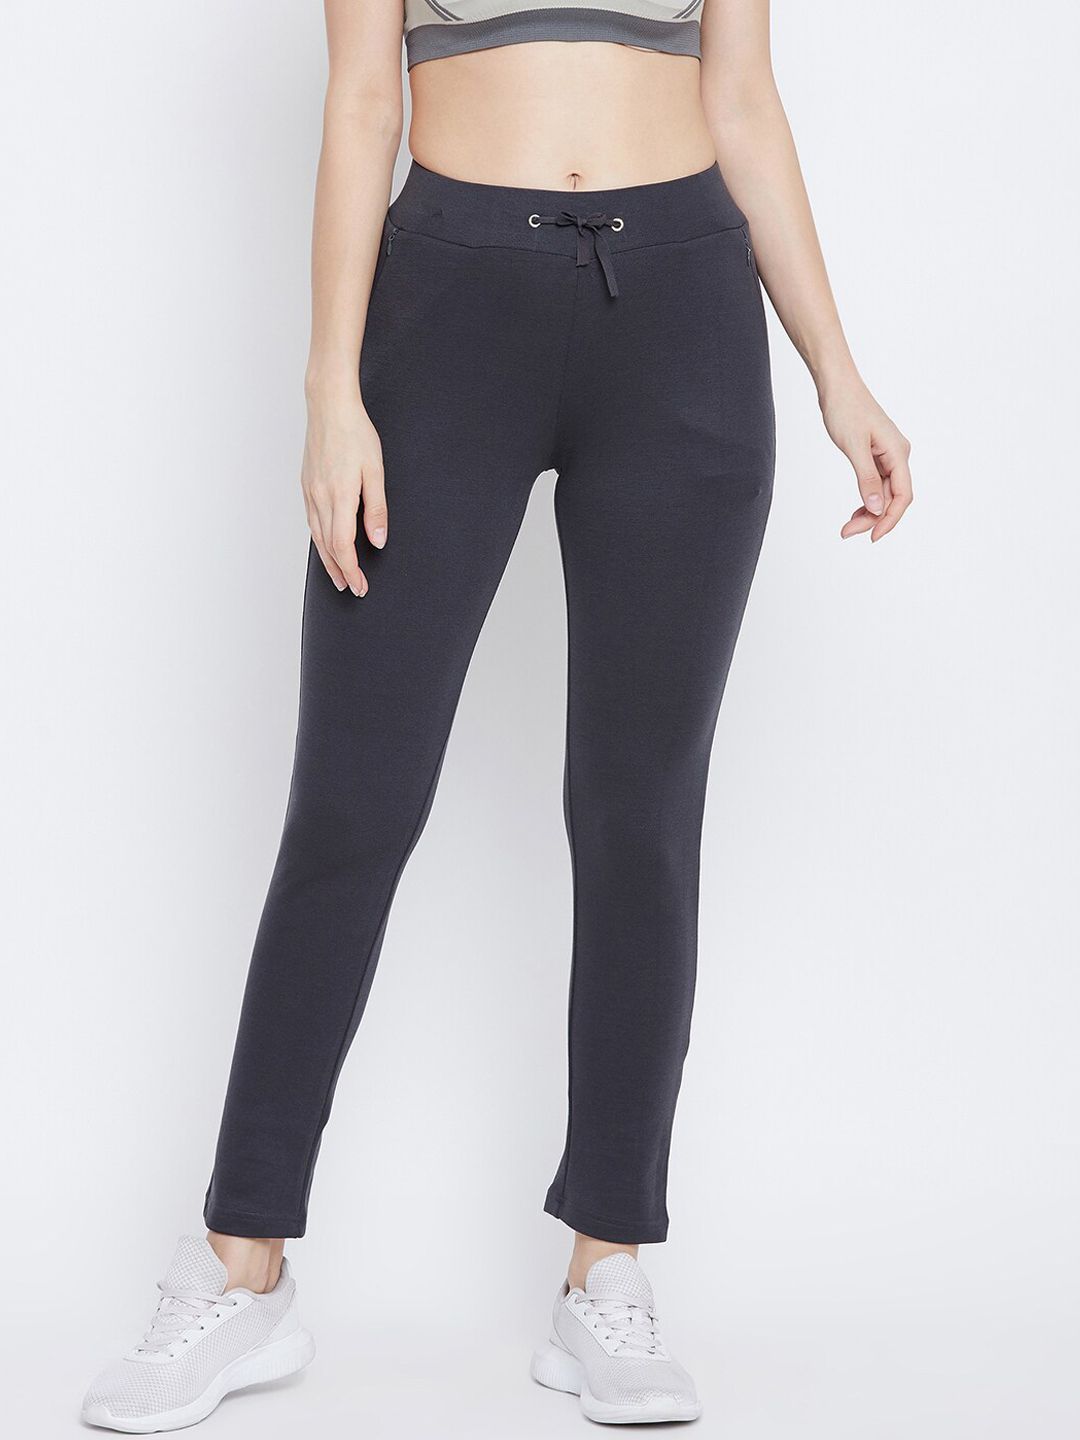 FRENCH FLEXIOUS Women Charcoal-Grey Solid Slim-Fit Track Pants Price in India